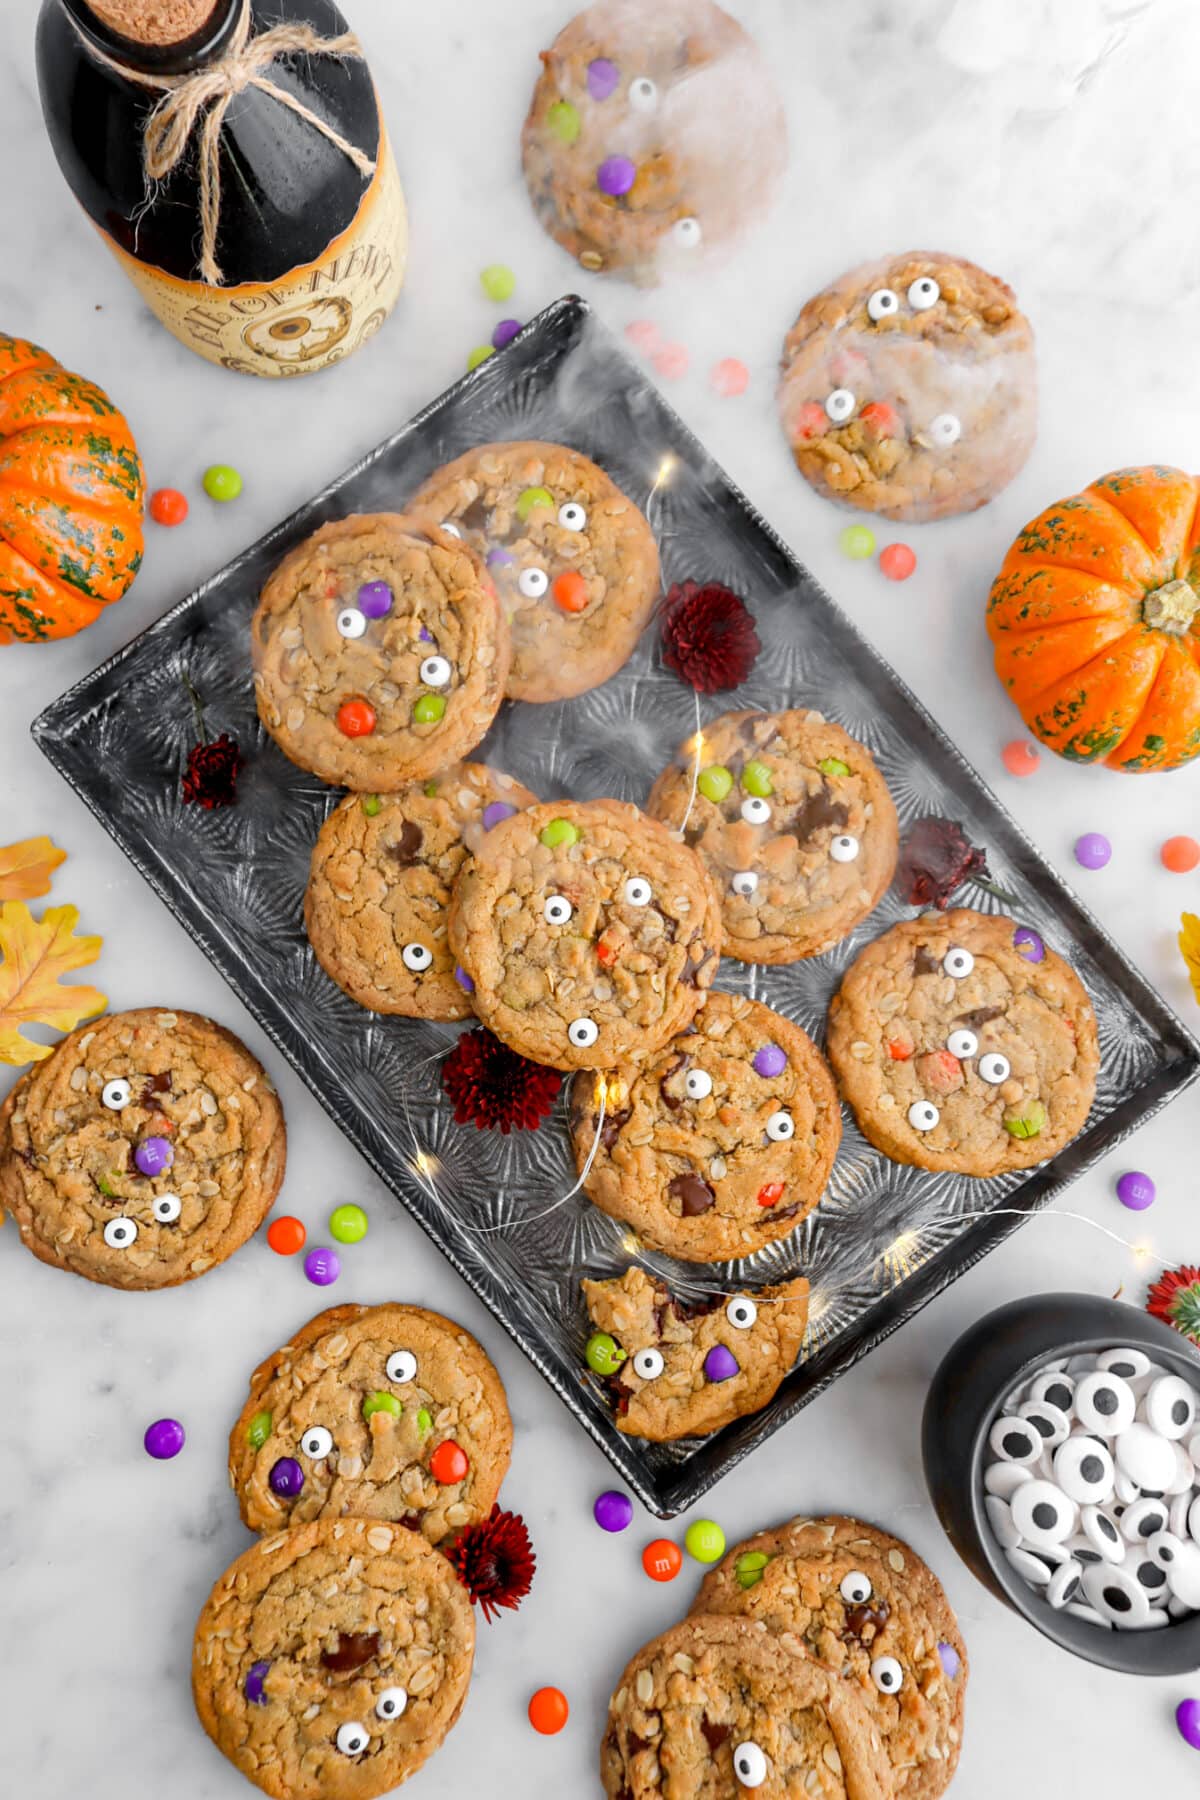 monster cookies on sheet pan with smoke and fairy lights, m&m candy, candy eyes, and pumpkins around on marble surface.